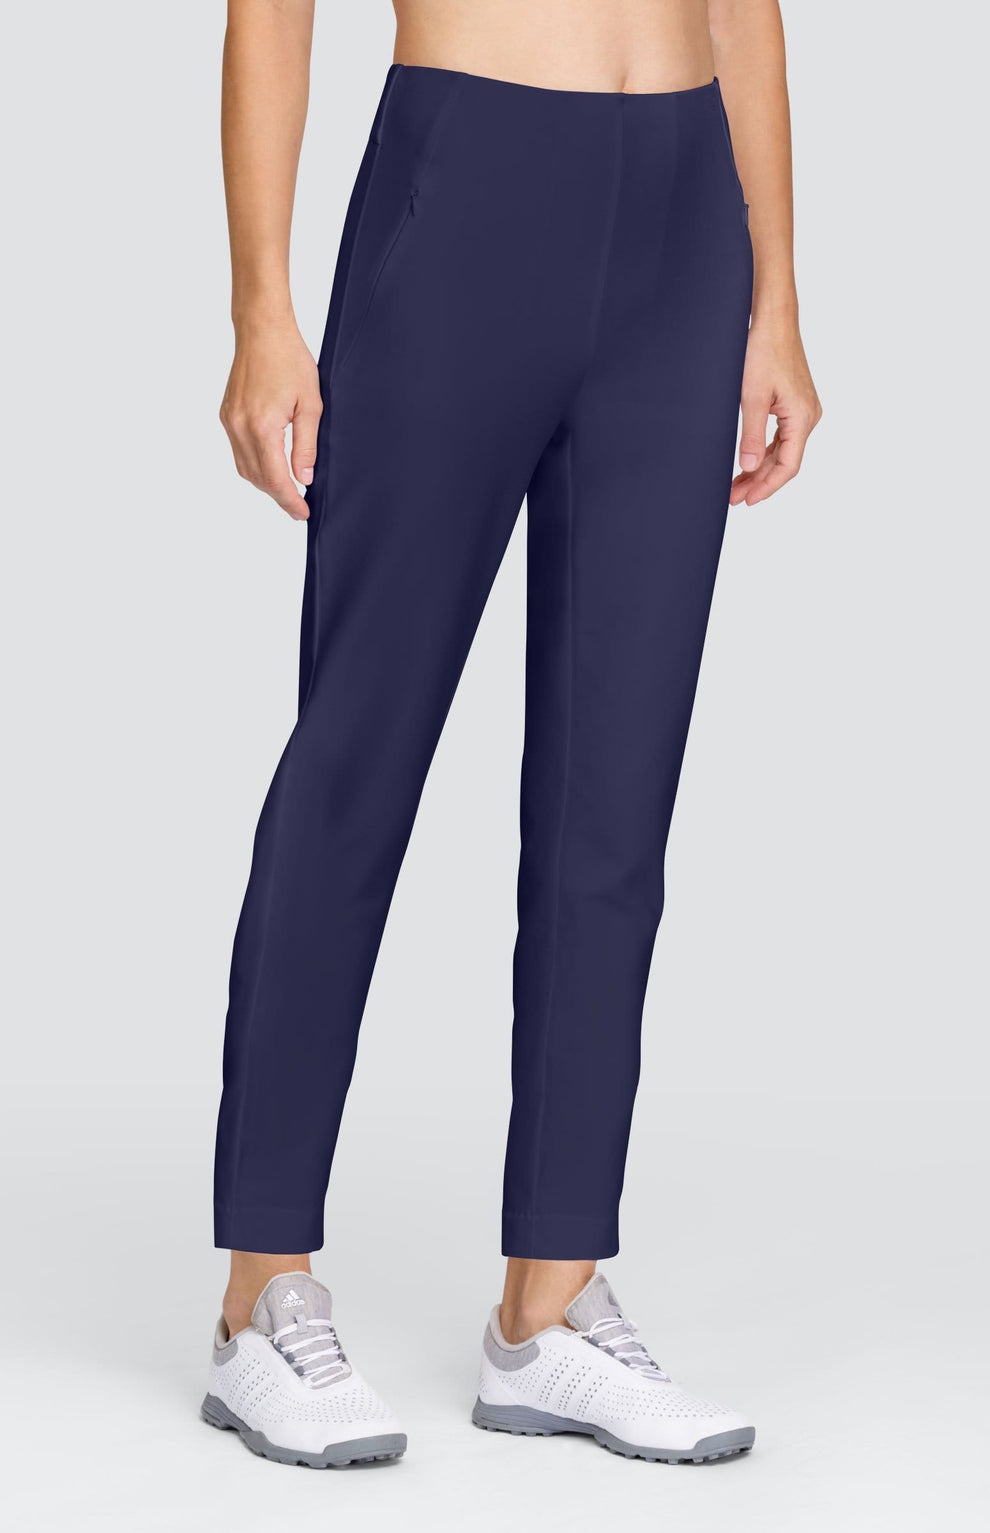 Allure 28 Ankle Pant - Night Navy